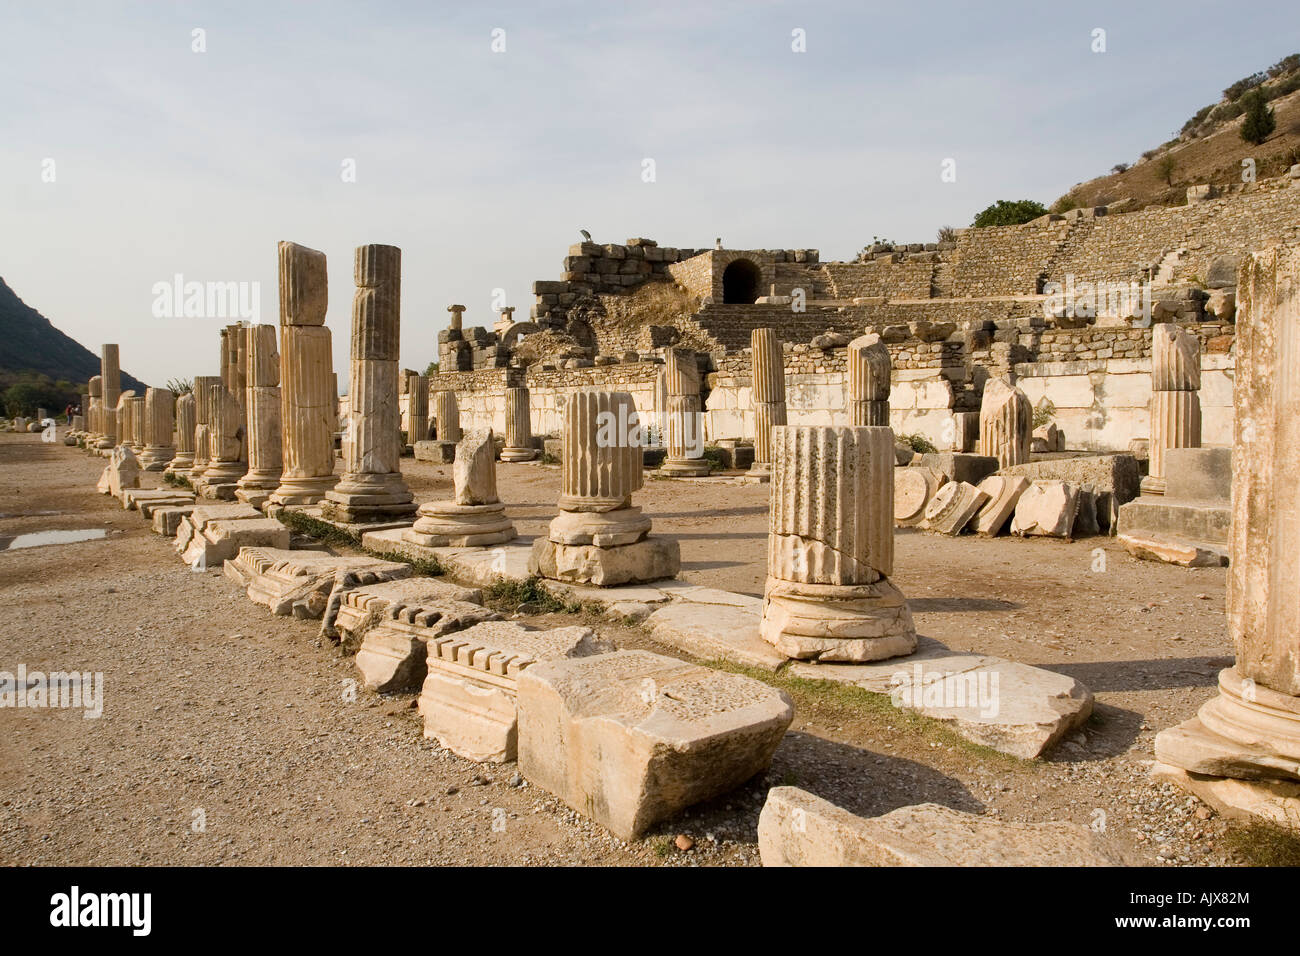 Ephesus - the Ionian city in ancient Anatolia, now Turkey. The ruins are a favourite international and local tourist attraction. Stock Photo